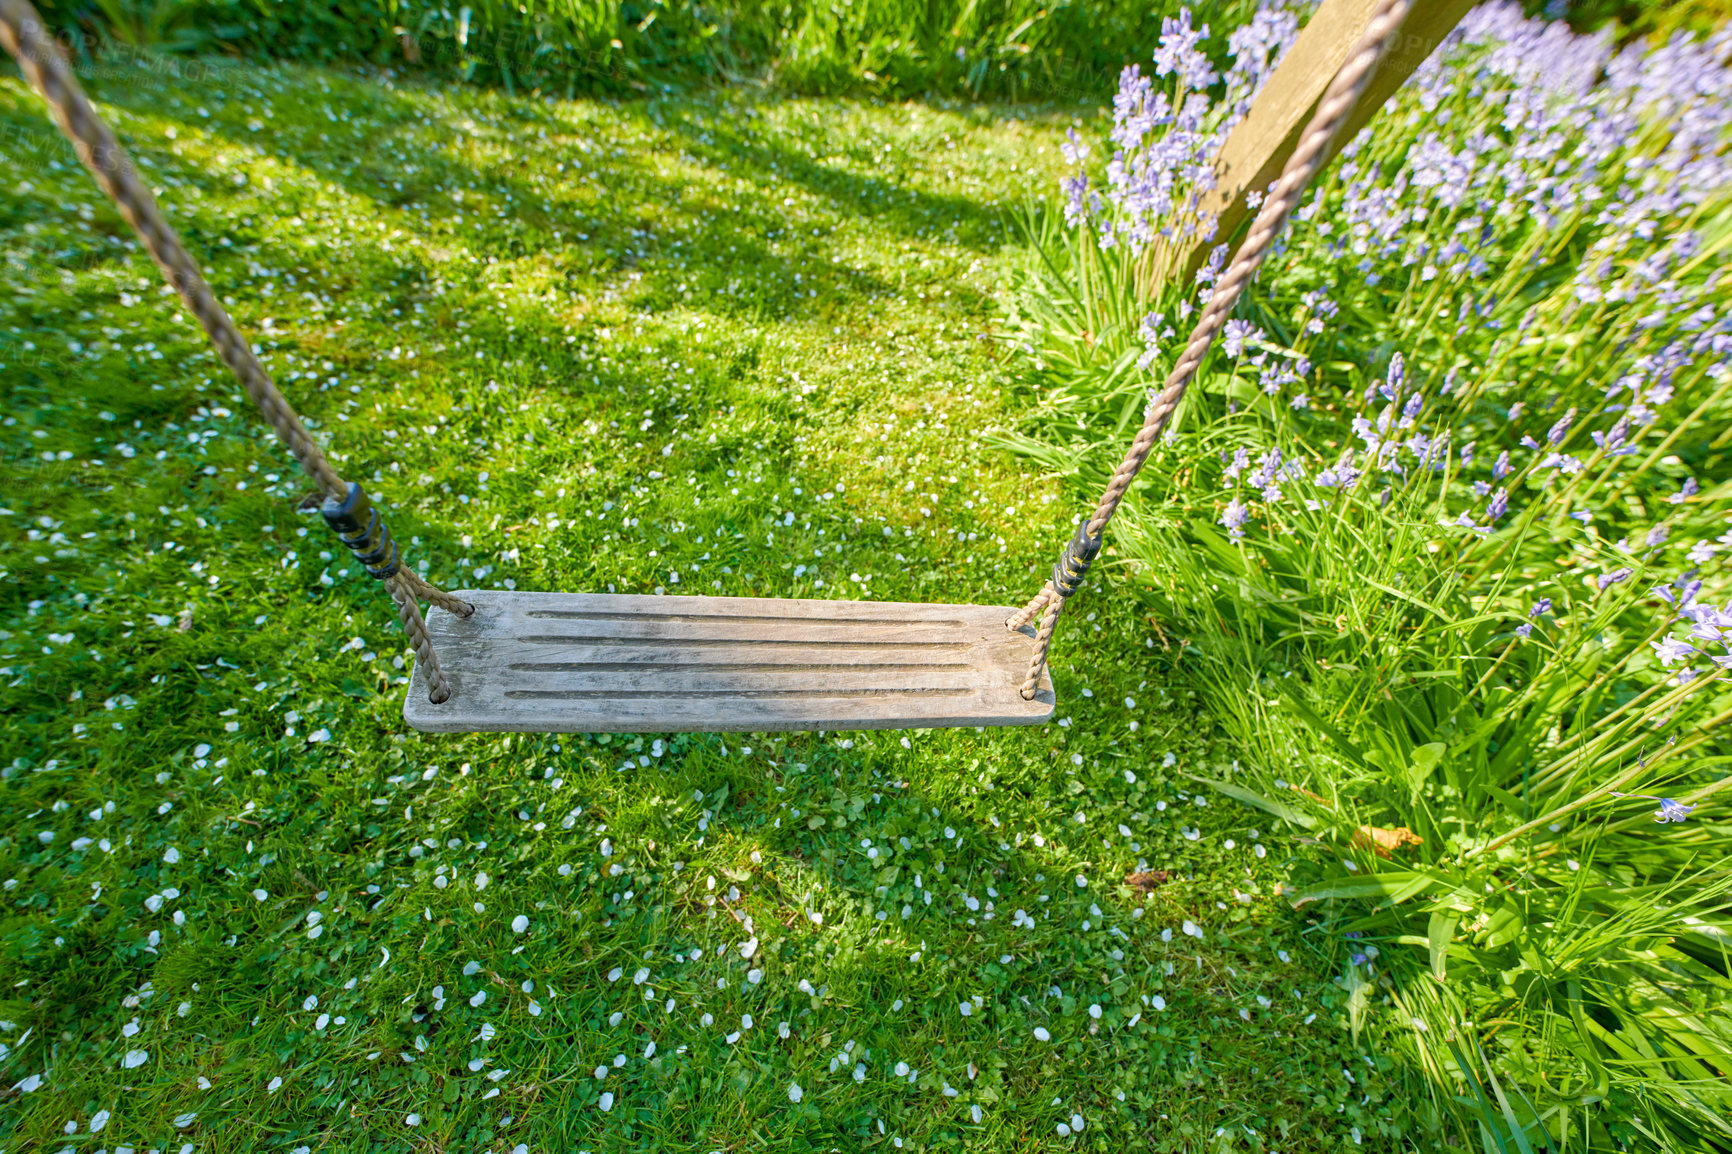 Buy stock photo Closeup of an empty seat on a swing in a backyard garden in summer. Green lush grass foliage growing in a garden with lavender flowers blossoming and blooming. Old rustic wooden swing in a meadow